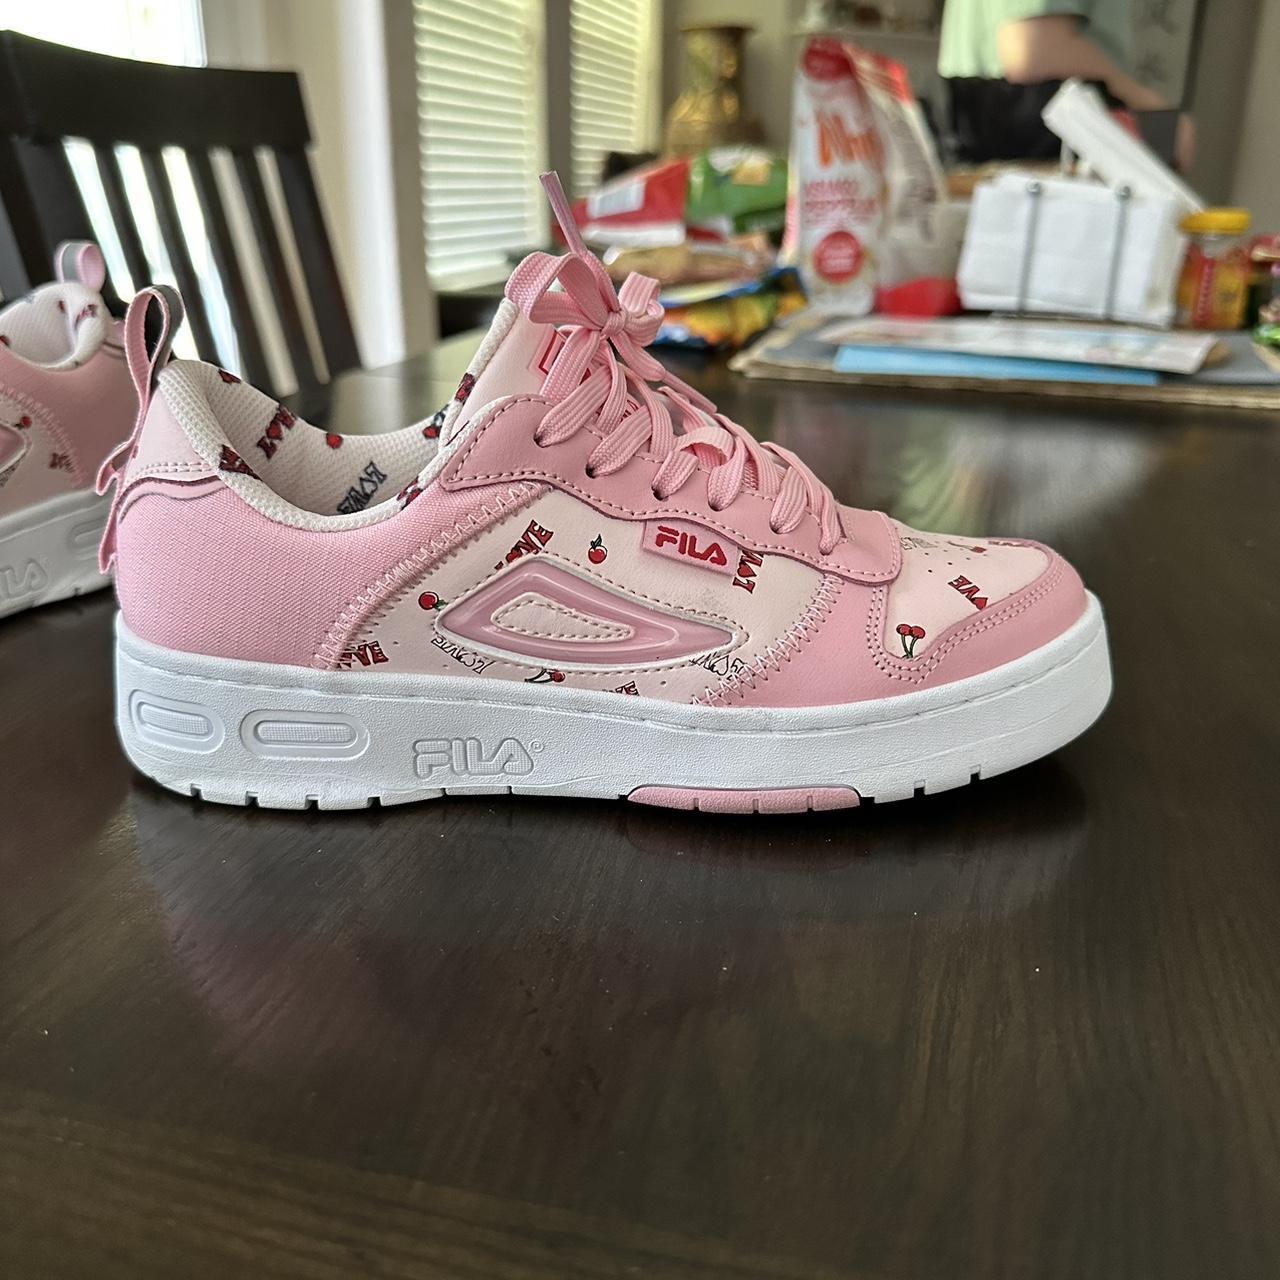 Discontinued pink FILA love shoes. They're - Depop